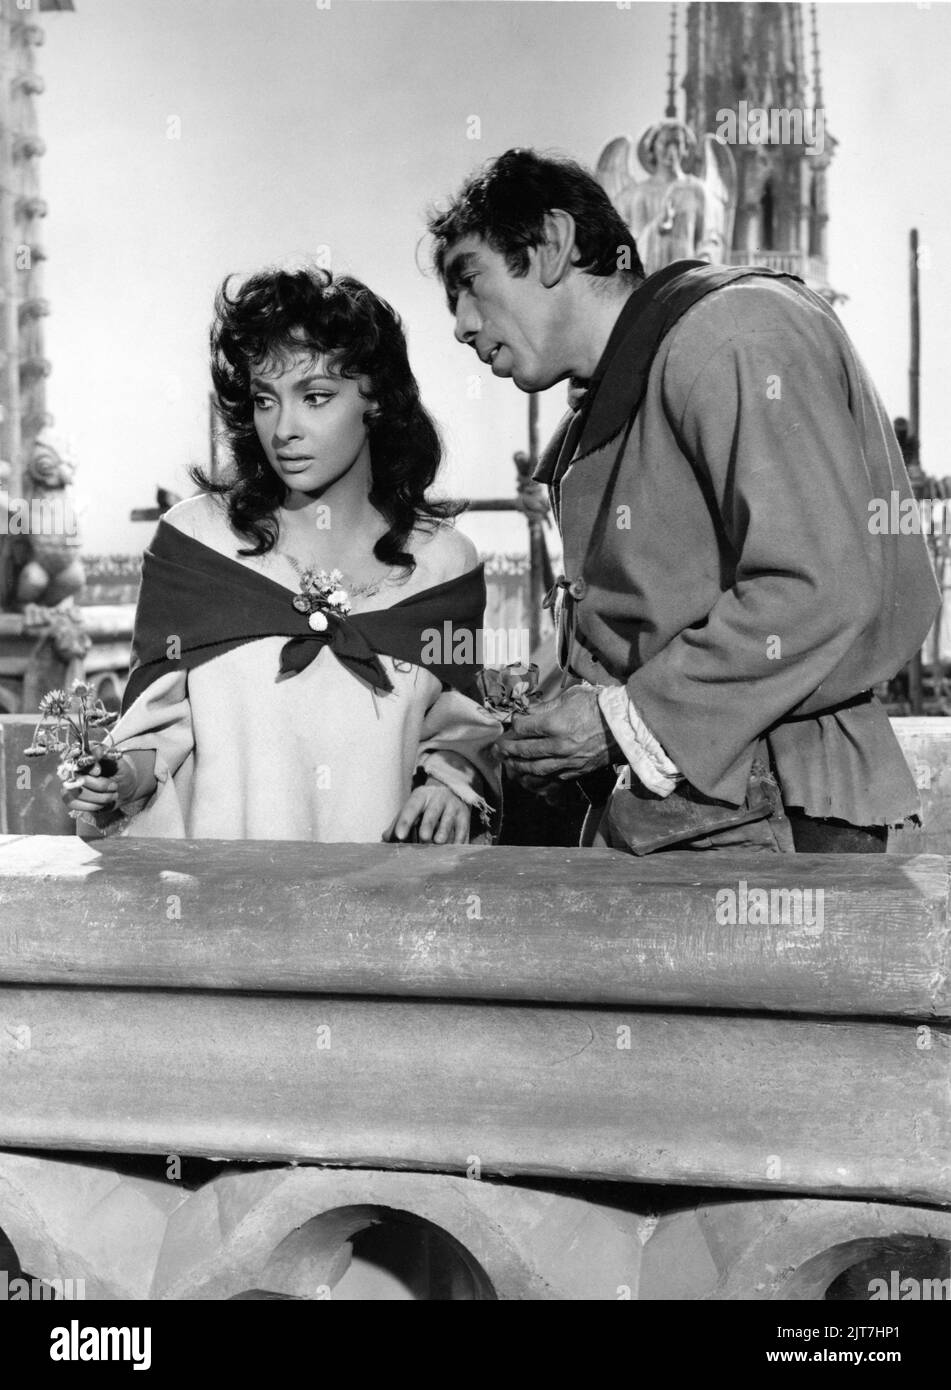 GINA LOLLOBRIGIDA as Esmeralda and ANTHONY QUINN as Quasimodo in THE HUNCHBACK OF NOTRE DAME / NOTRE DAME DE PARIS 1956 director JEAN DELANNOY novel Victor Hugo adaptation / dialogue Jean Aurenche and Jacques Prevert music Georges Auric costume design Georges Benda production design Rene Renoux choreographer Leonid Massine producers Raymond and Robert Hakim France - Italy co-production Paris Film Productions / Panitalia Stock Photo